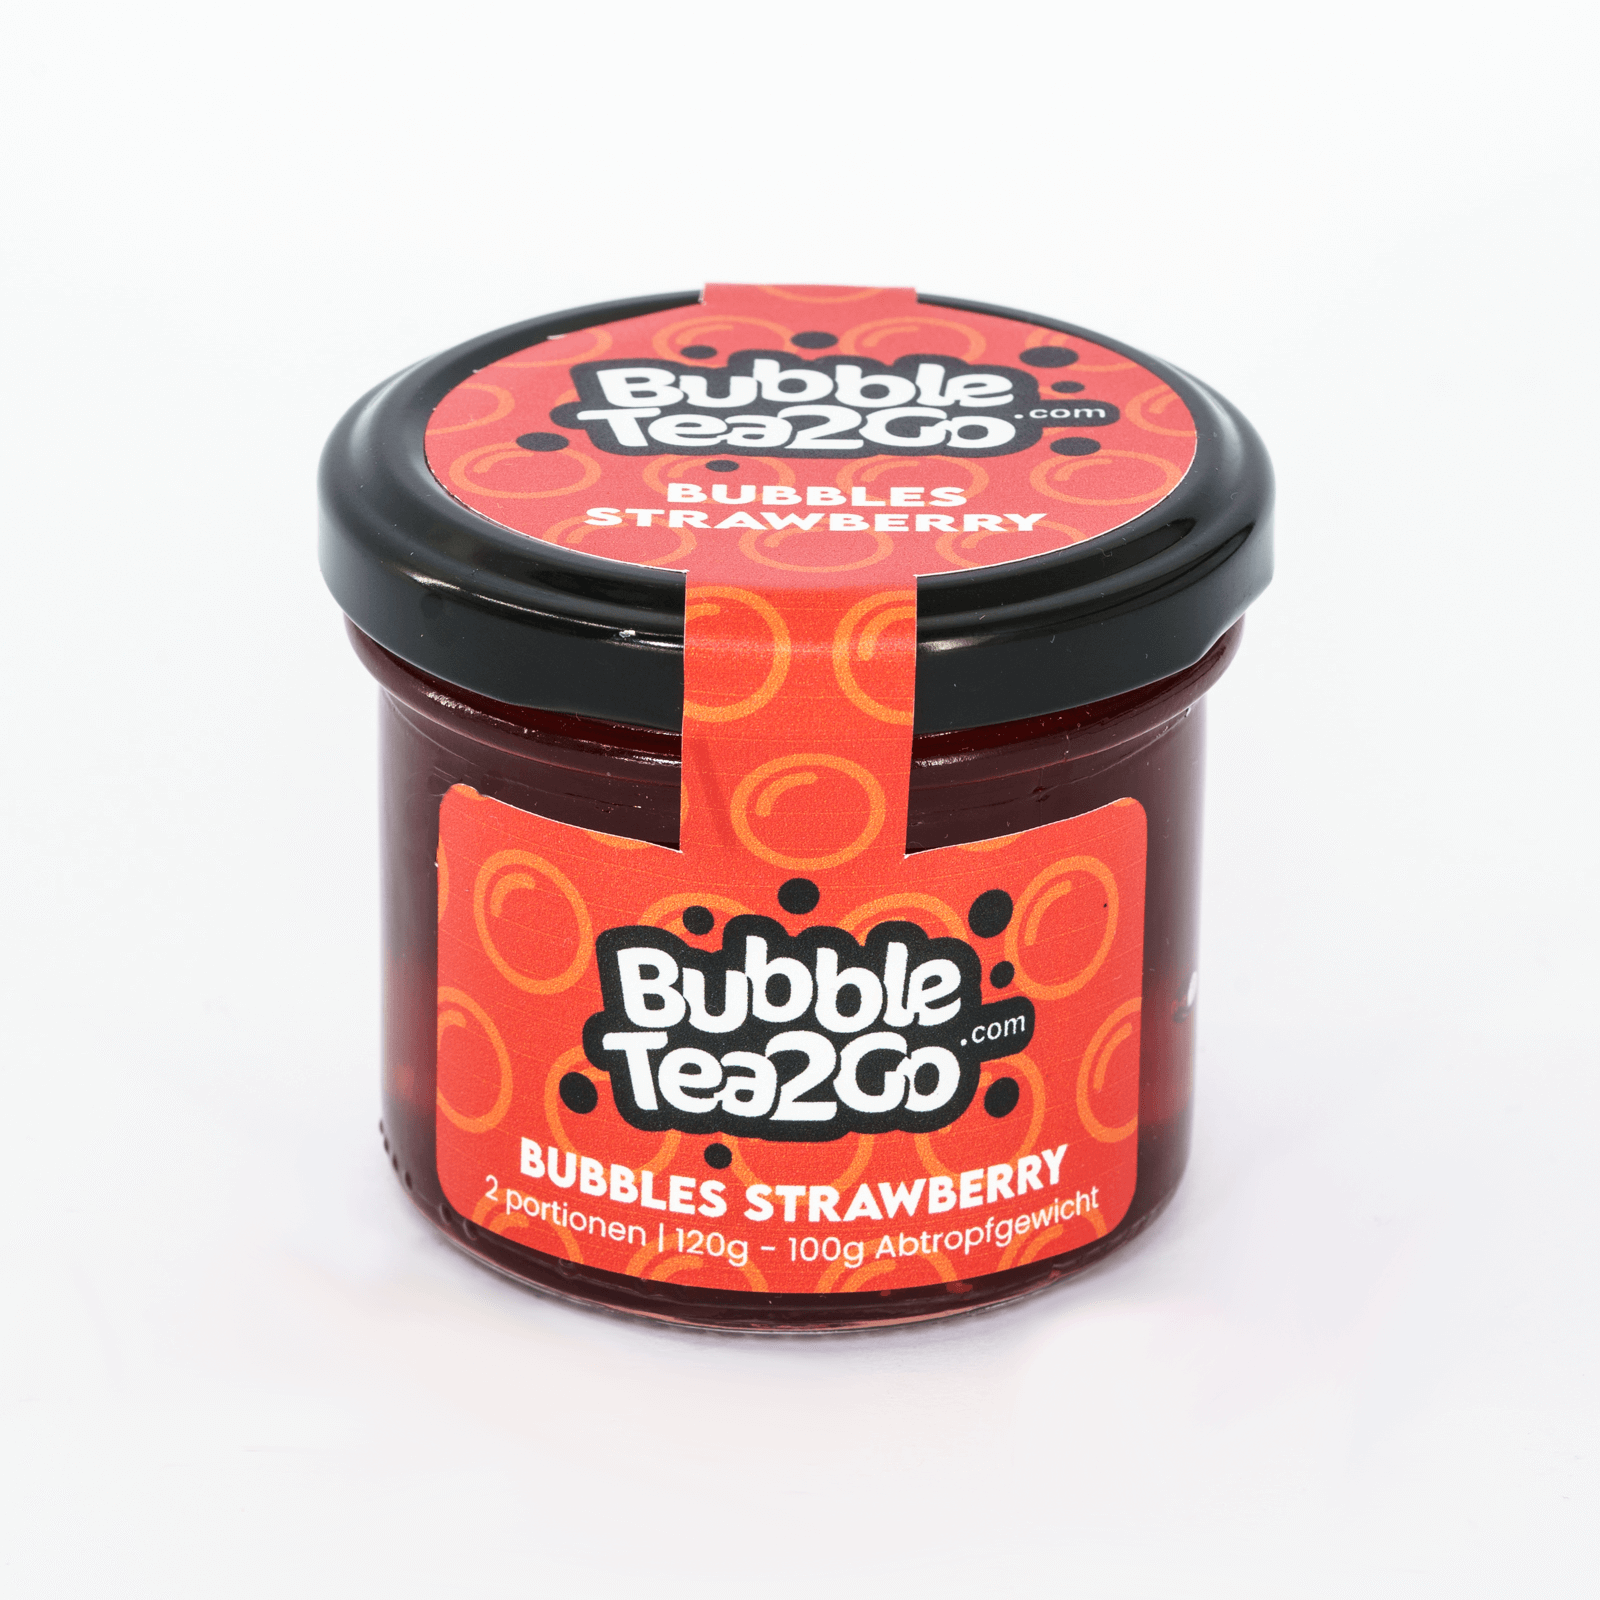 Bubbles - Strawberry 2 portions (120g)